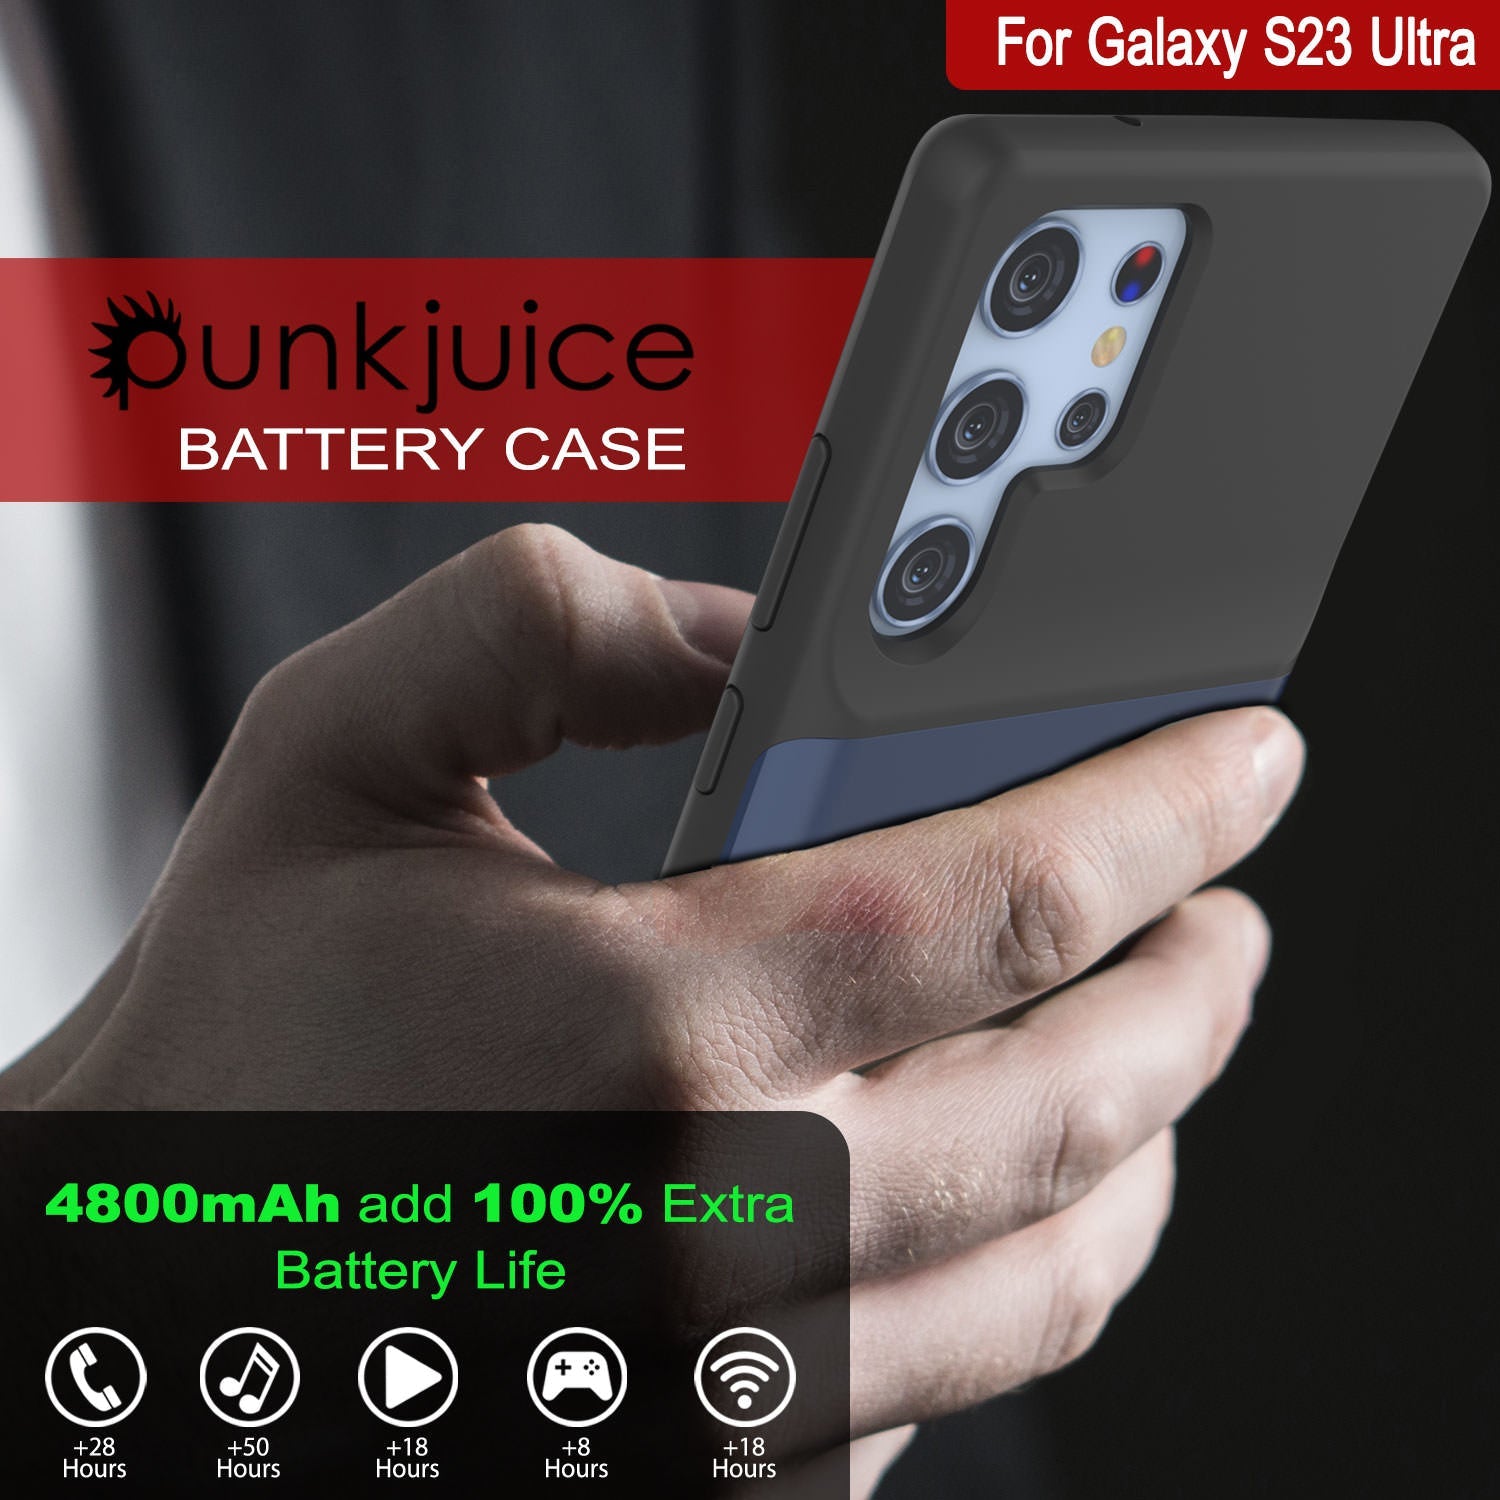 PunkJuice S23 Ultra Battery Case Blue - Portable Charging Power Juice Bank with 4800mAh